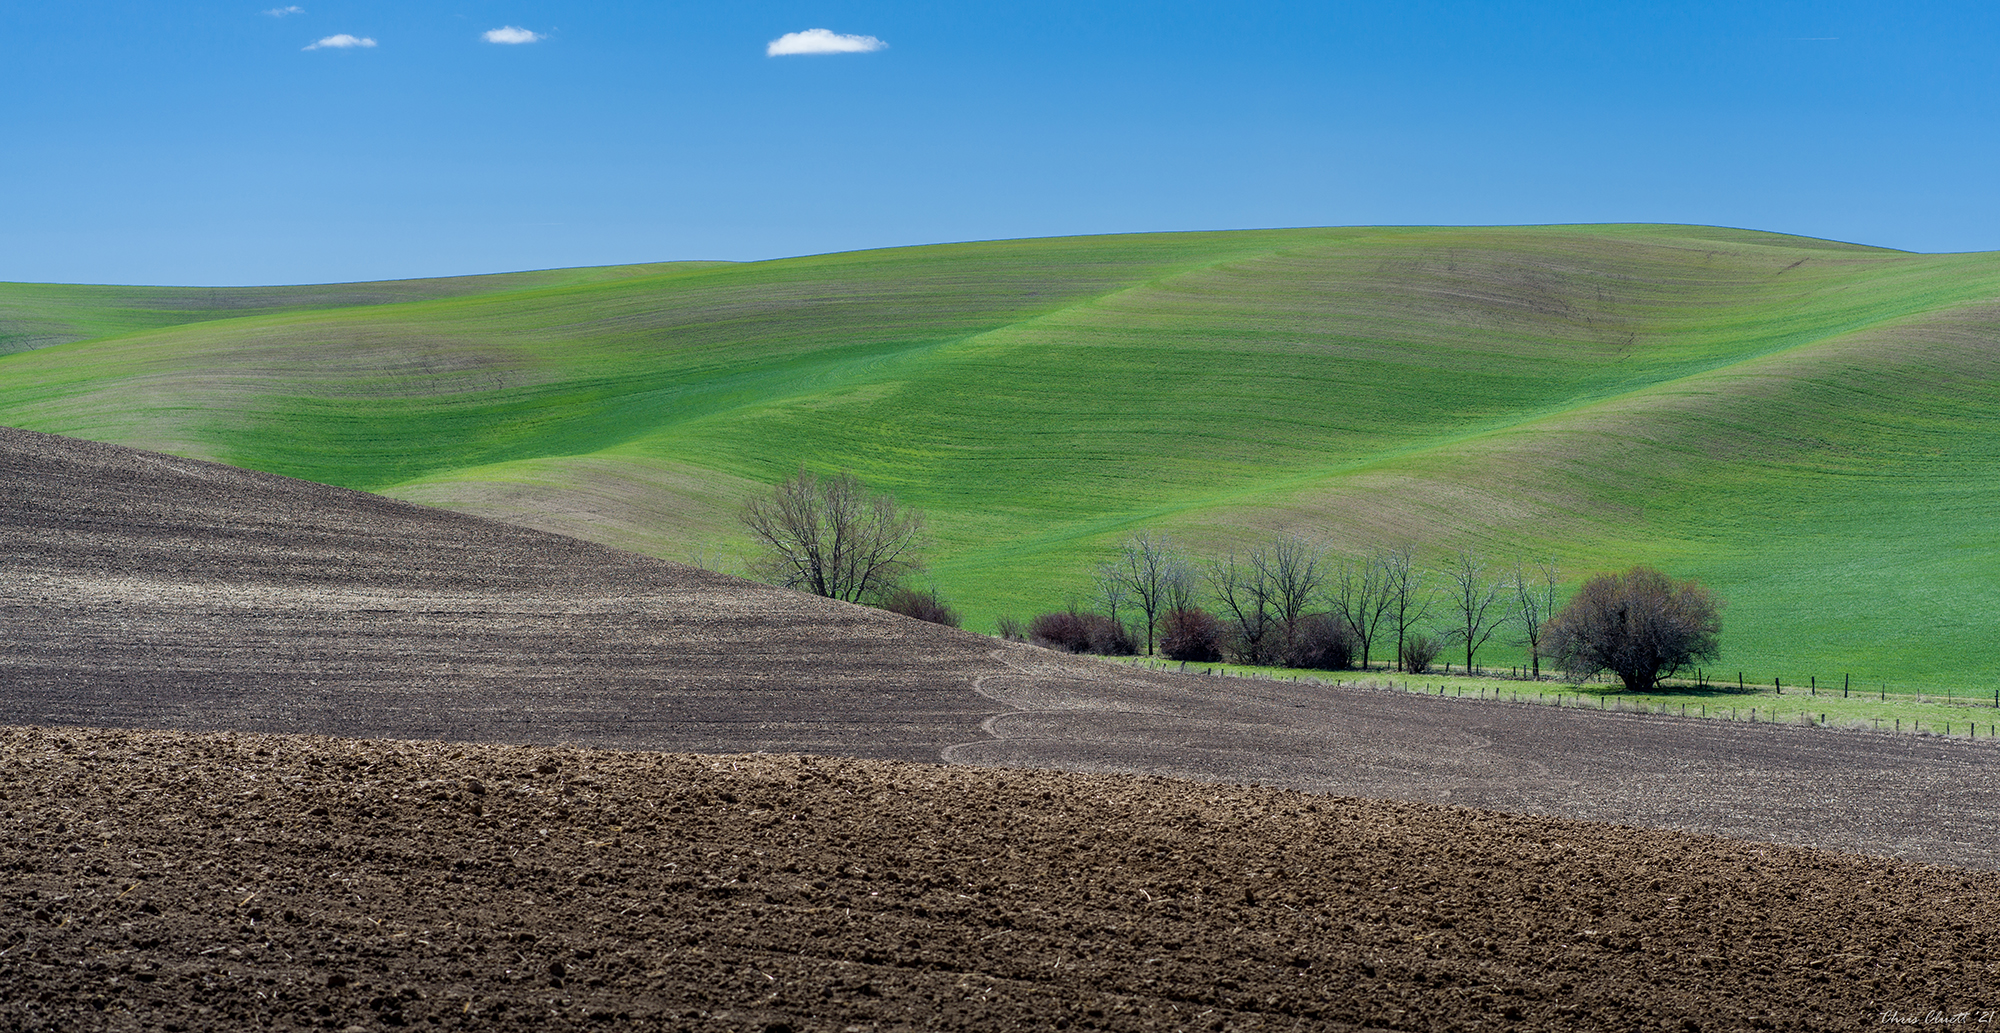 Soft colors just emerging from a monochrome winter dormancy; earth tones with patterning in the tilled soil; natural and manmade lines and shapes document the early spring Palouse landscape.